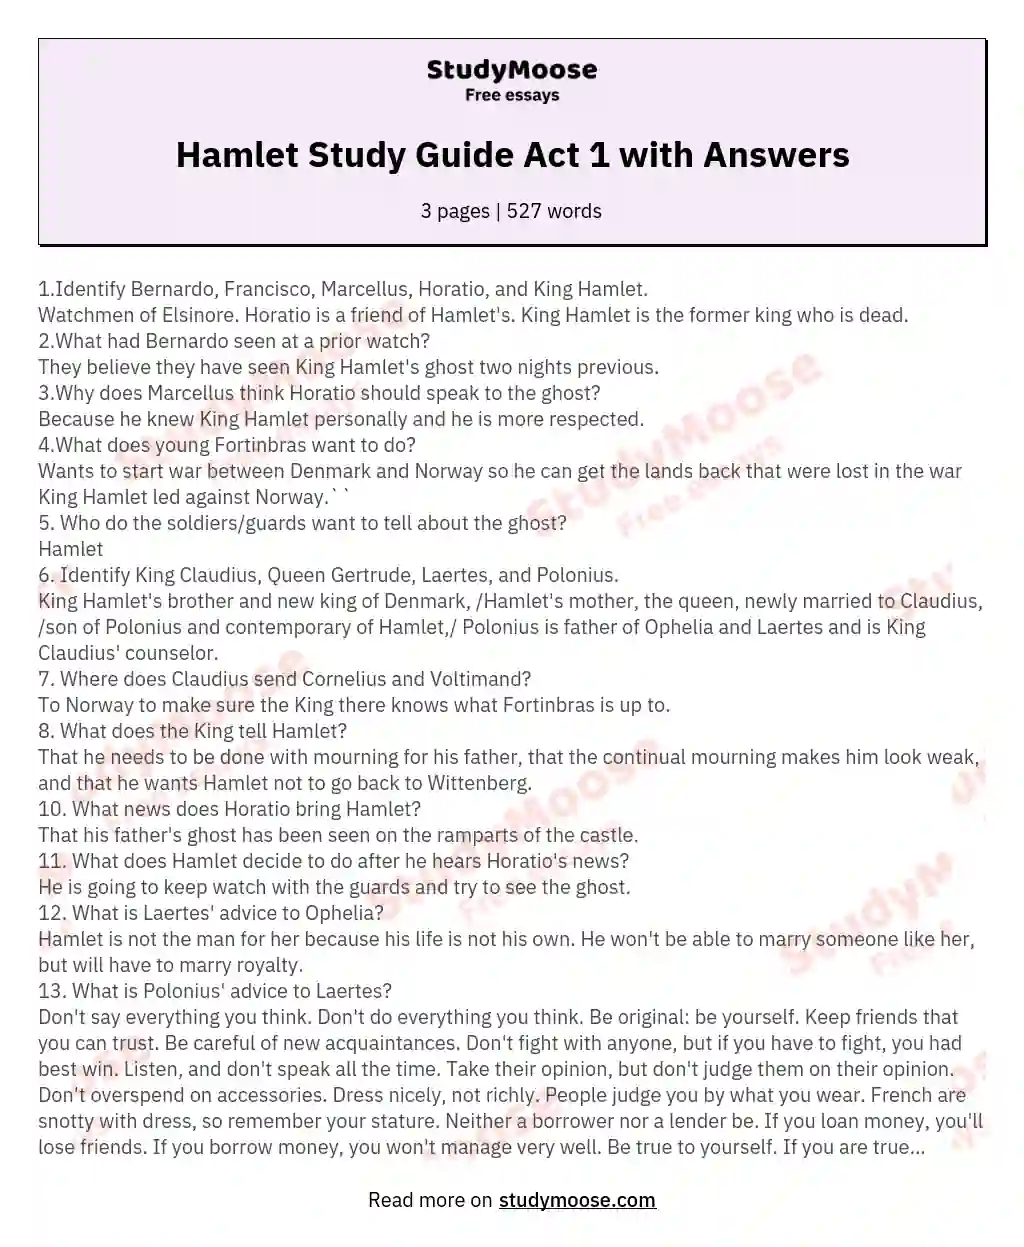 Hamlet Study Guide Act 1 with Answers essay